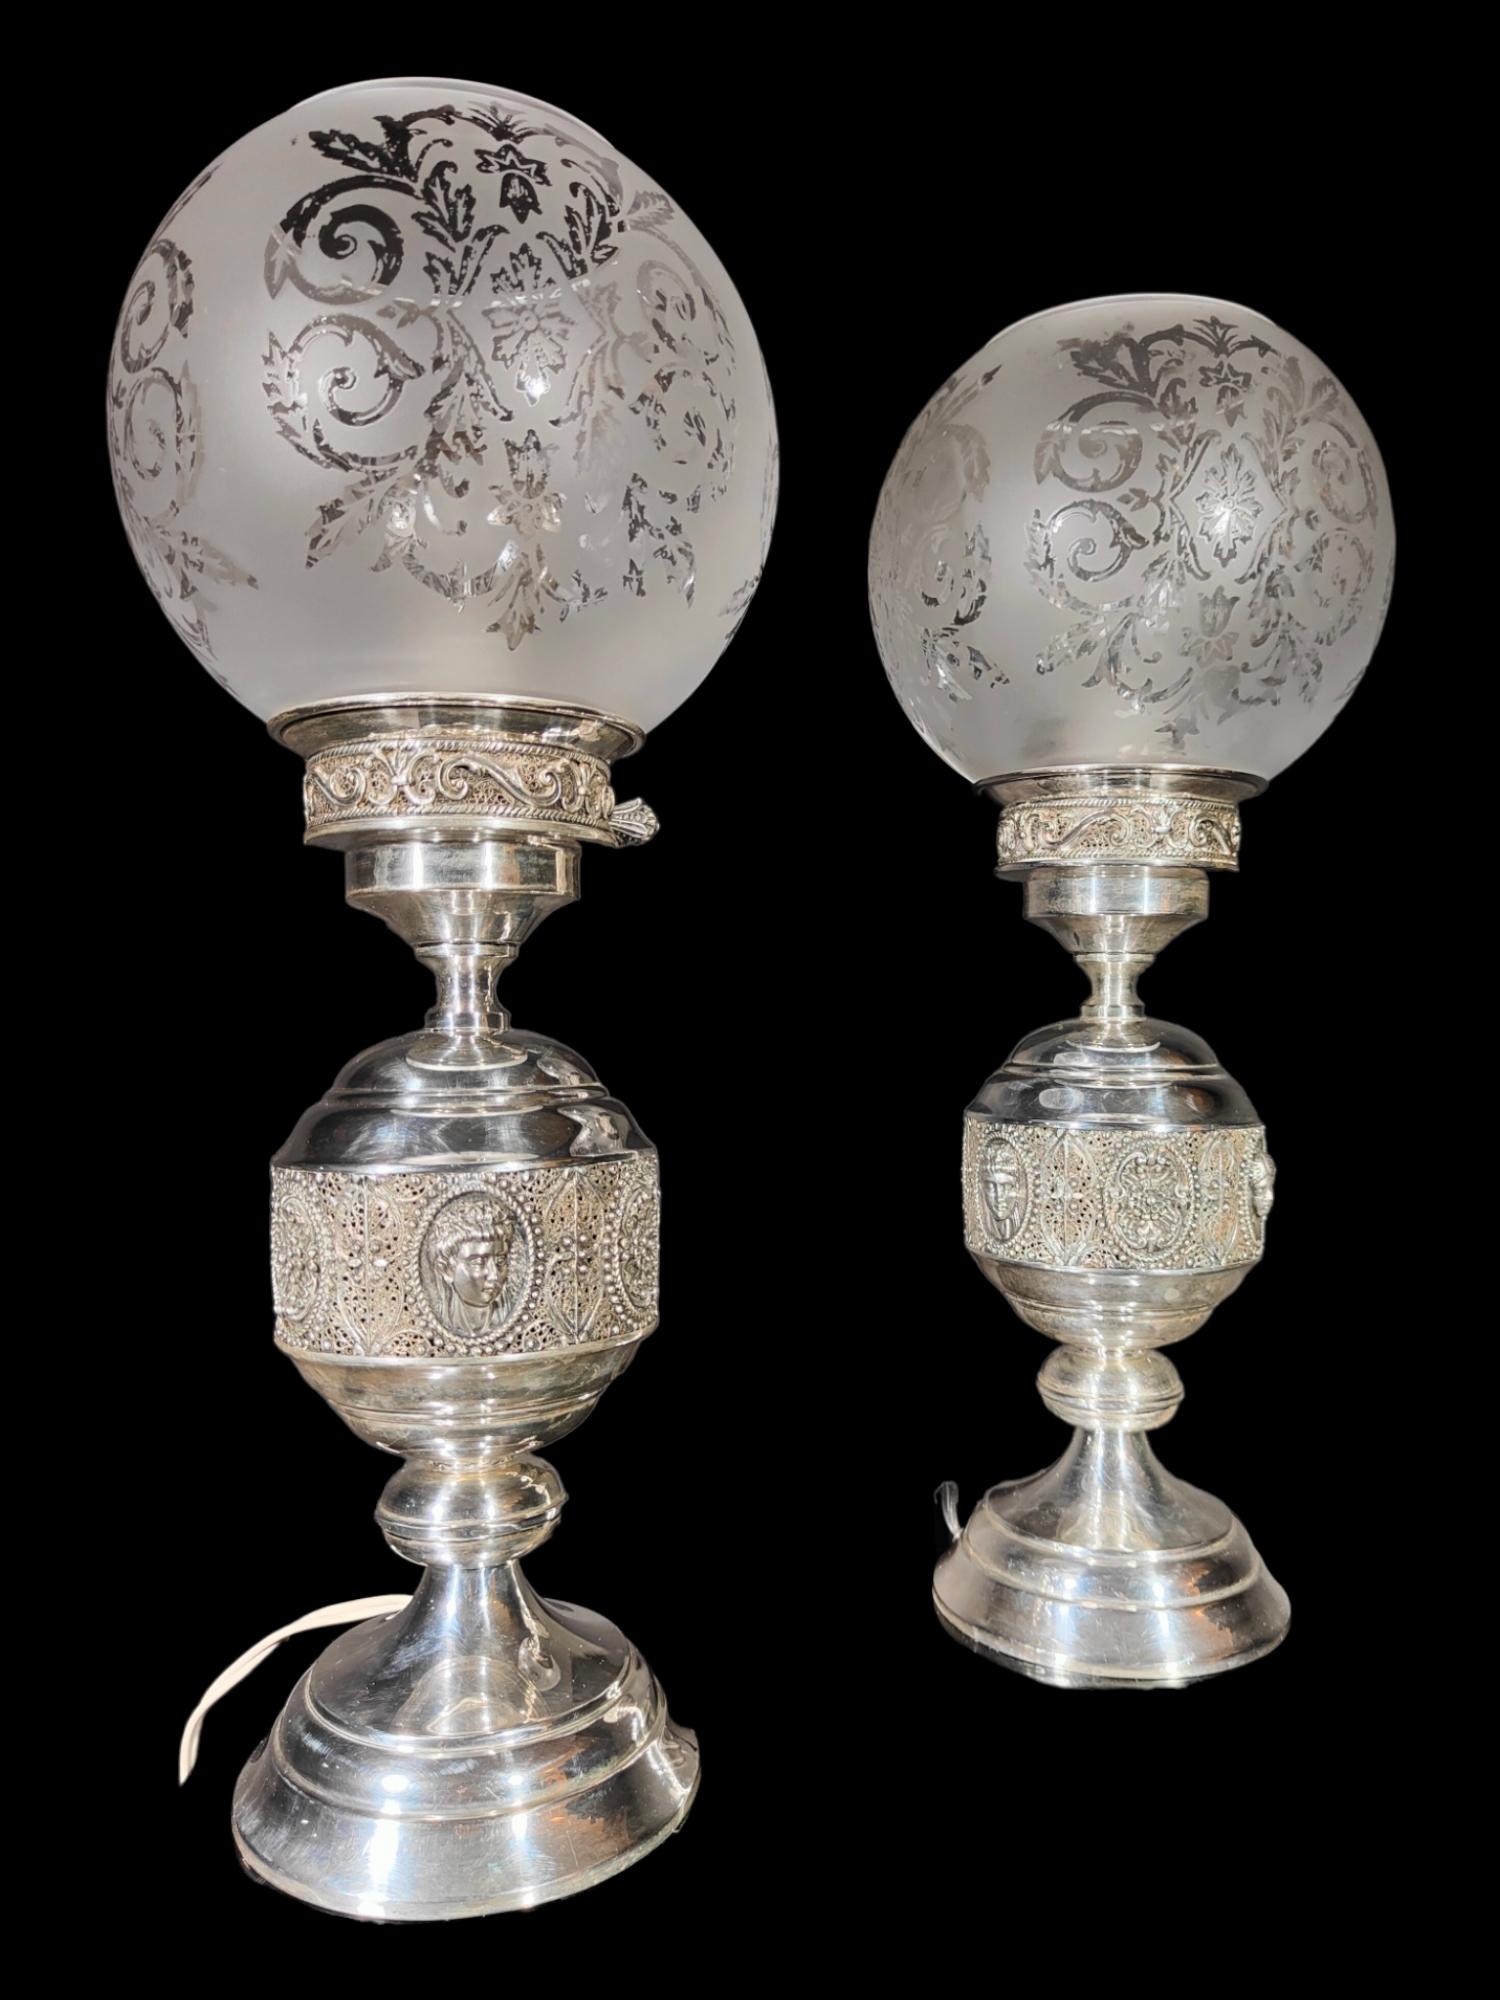 Pair of Lamps in Sterling Silver with Filigree For Sale 6